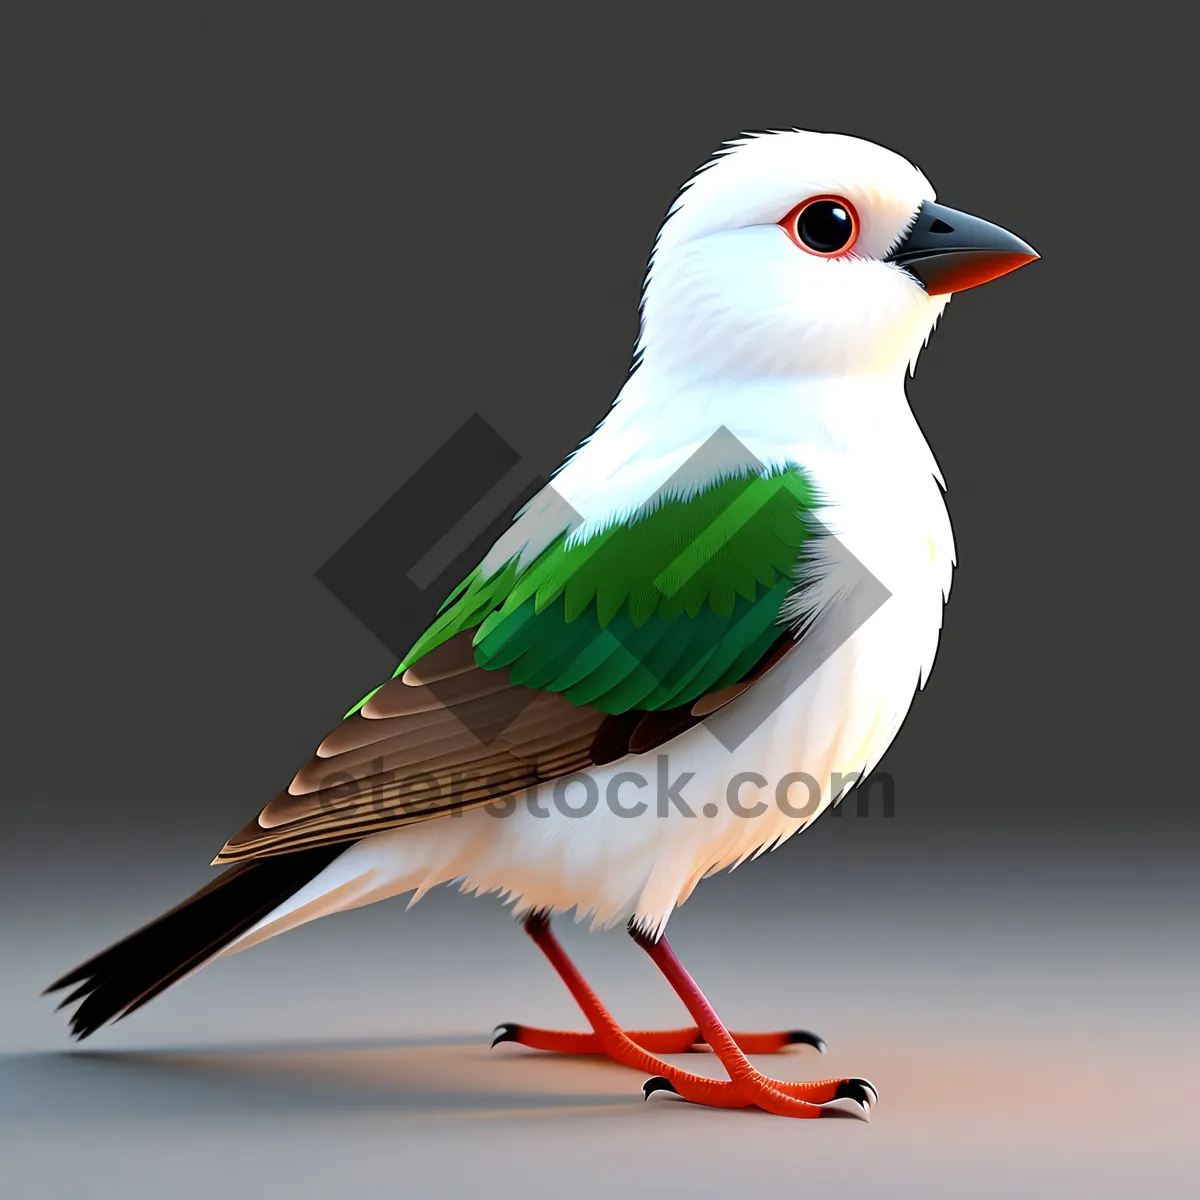 Picture of Adorable Bird with Striking Wing and Beak